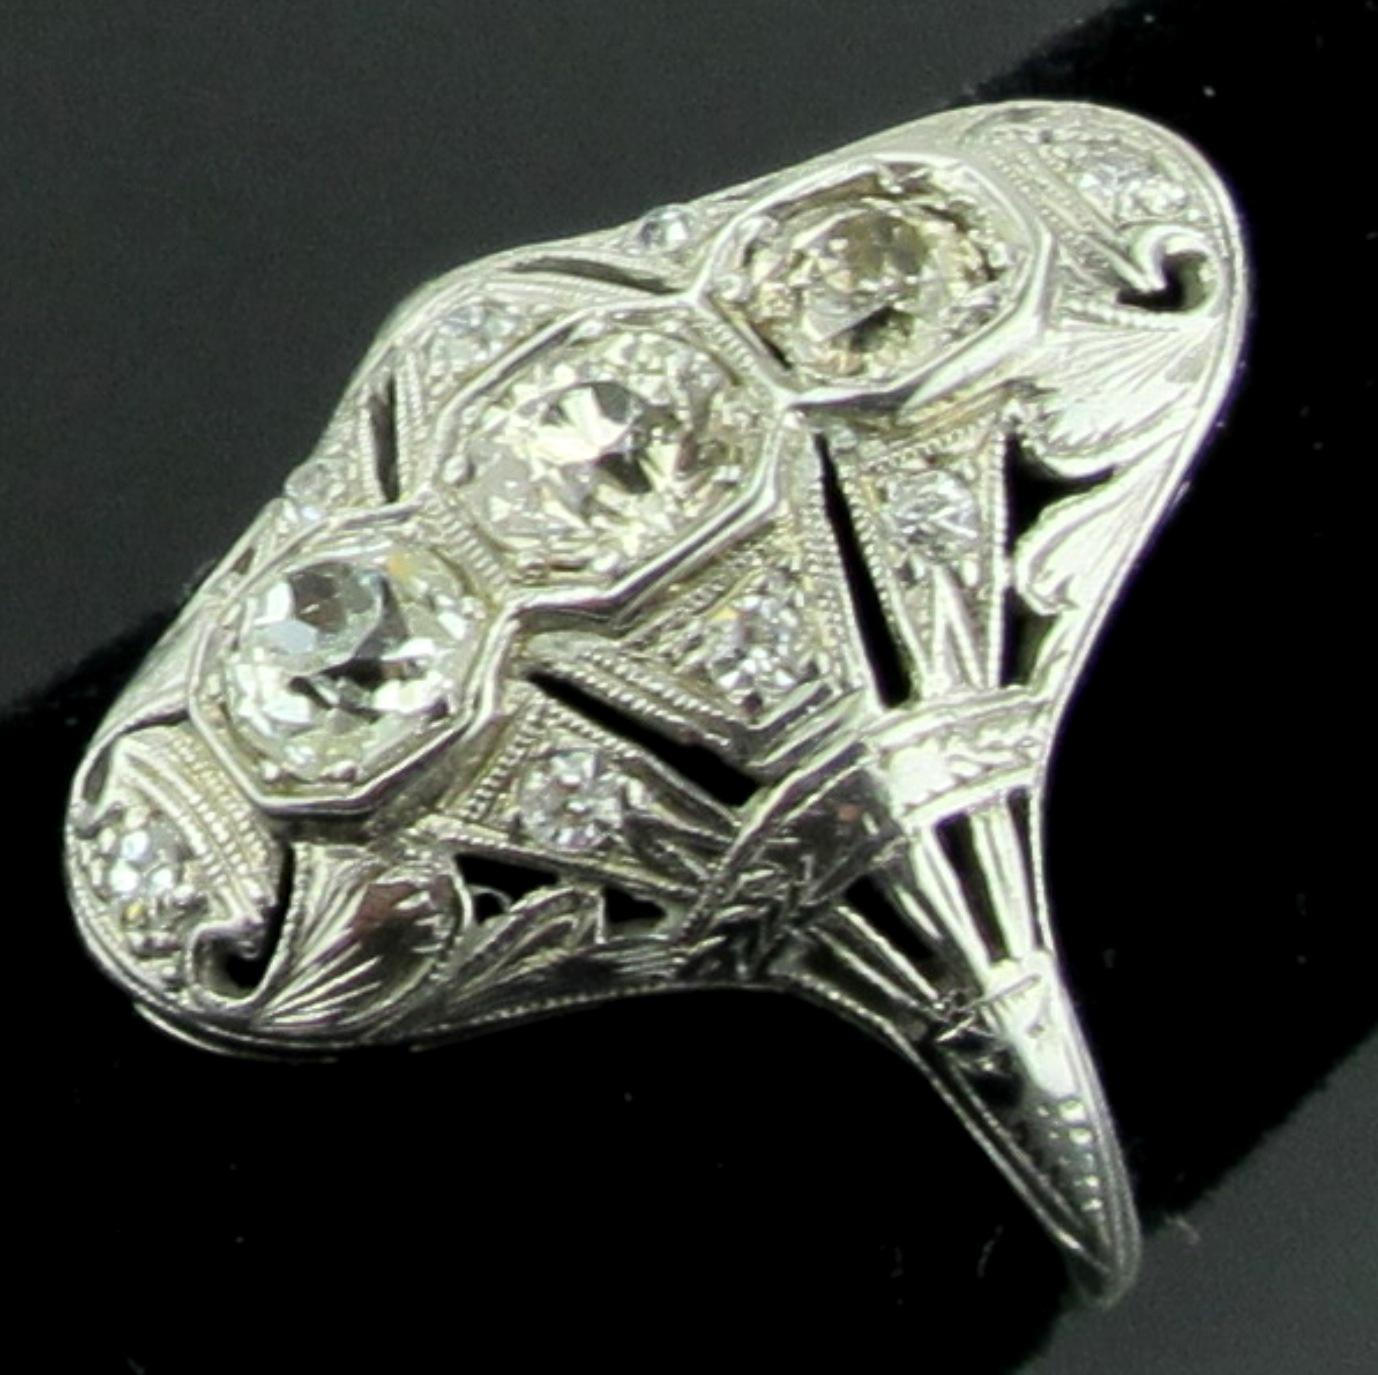 Circa 1920's vintage Diamond ring with 3 center Old European Cut diamonds weighing approximately 1 carat total, with 8 smaller Old European cut diamonds weighing approximately 0.25 carats.  Top is Platinum and shank is 18 karat white gold.  Ring